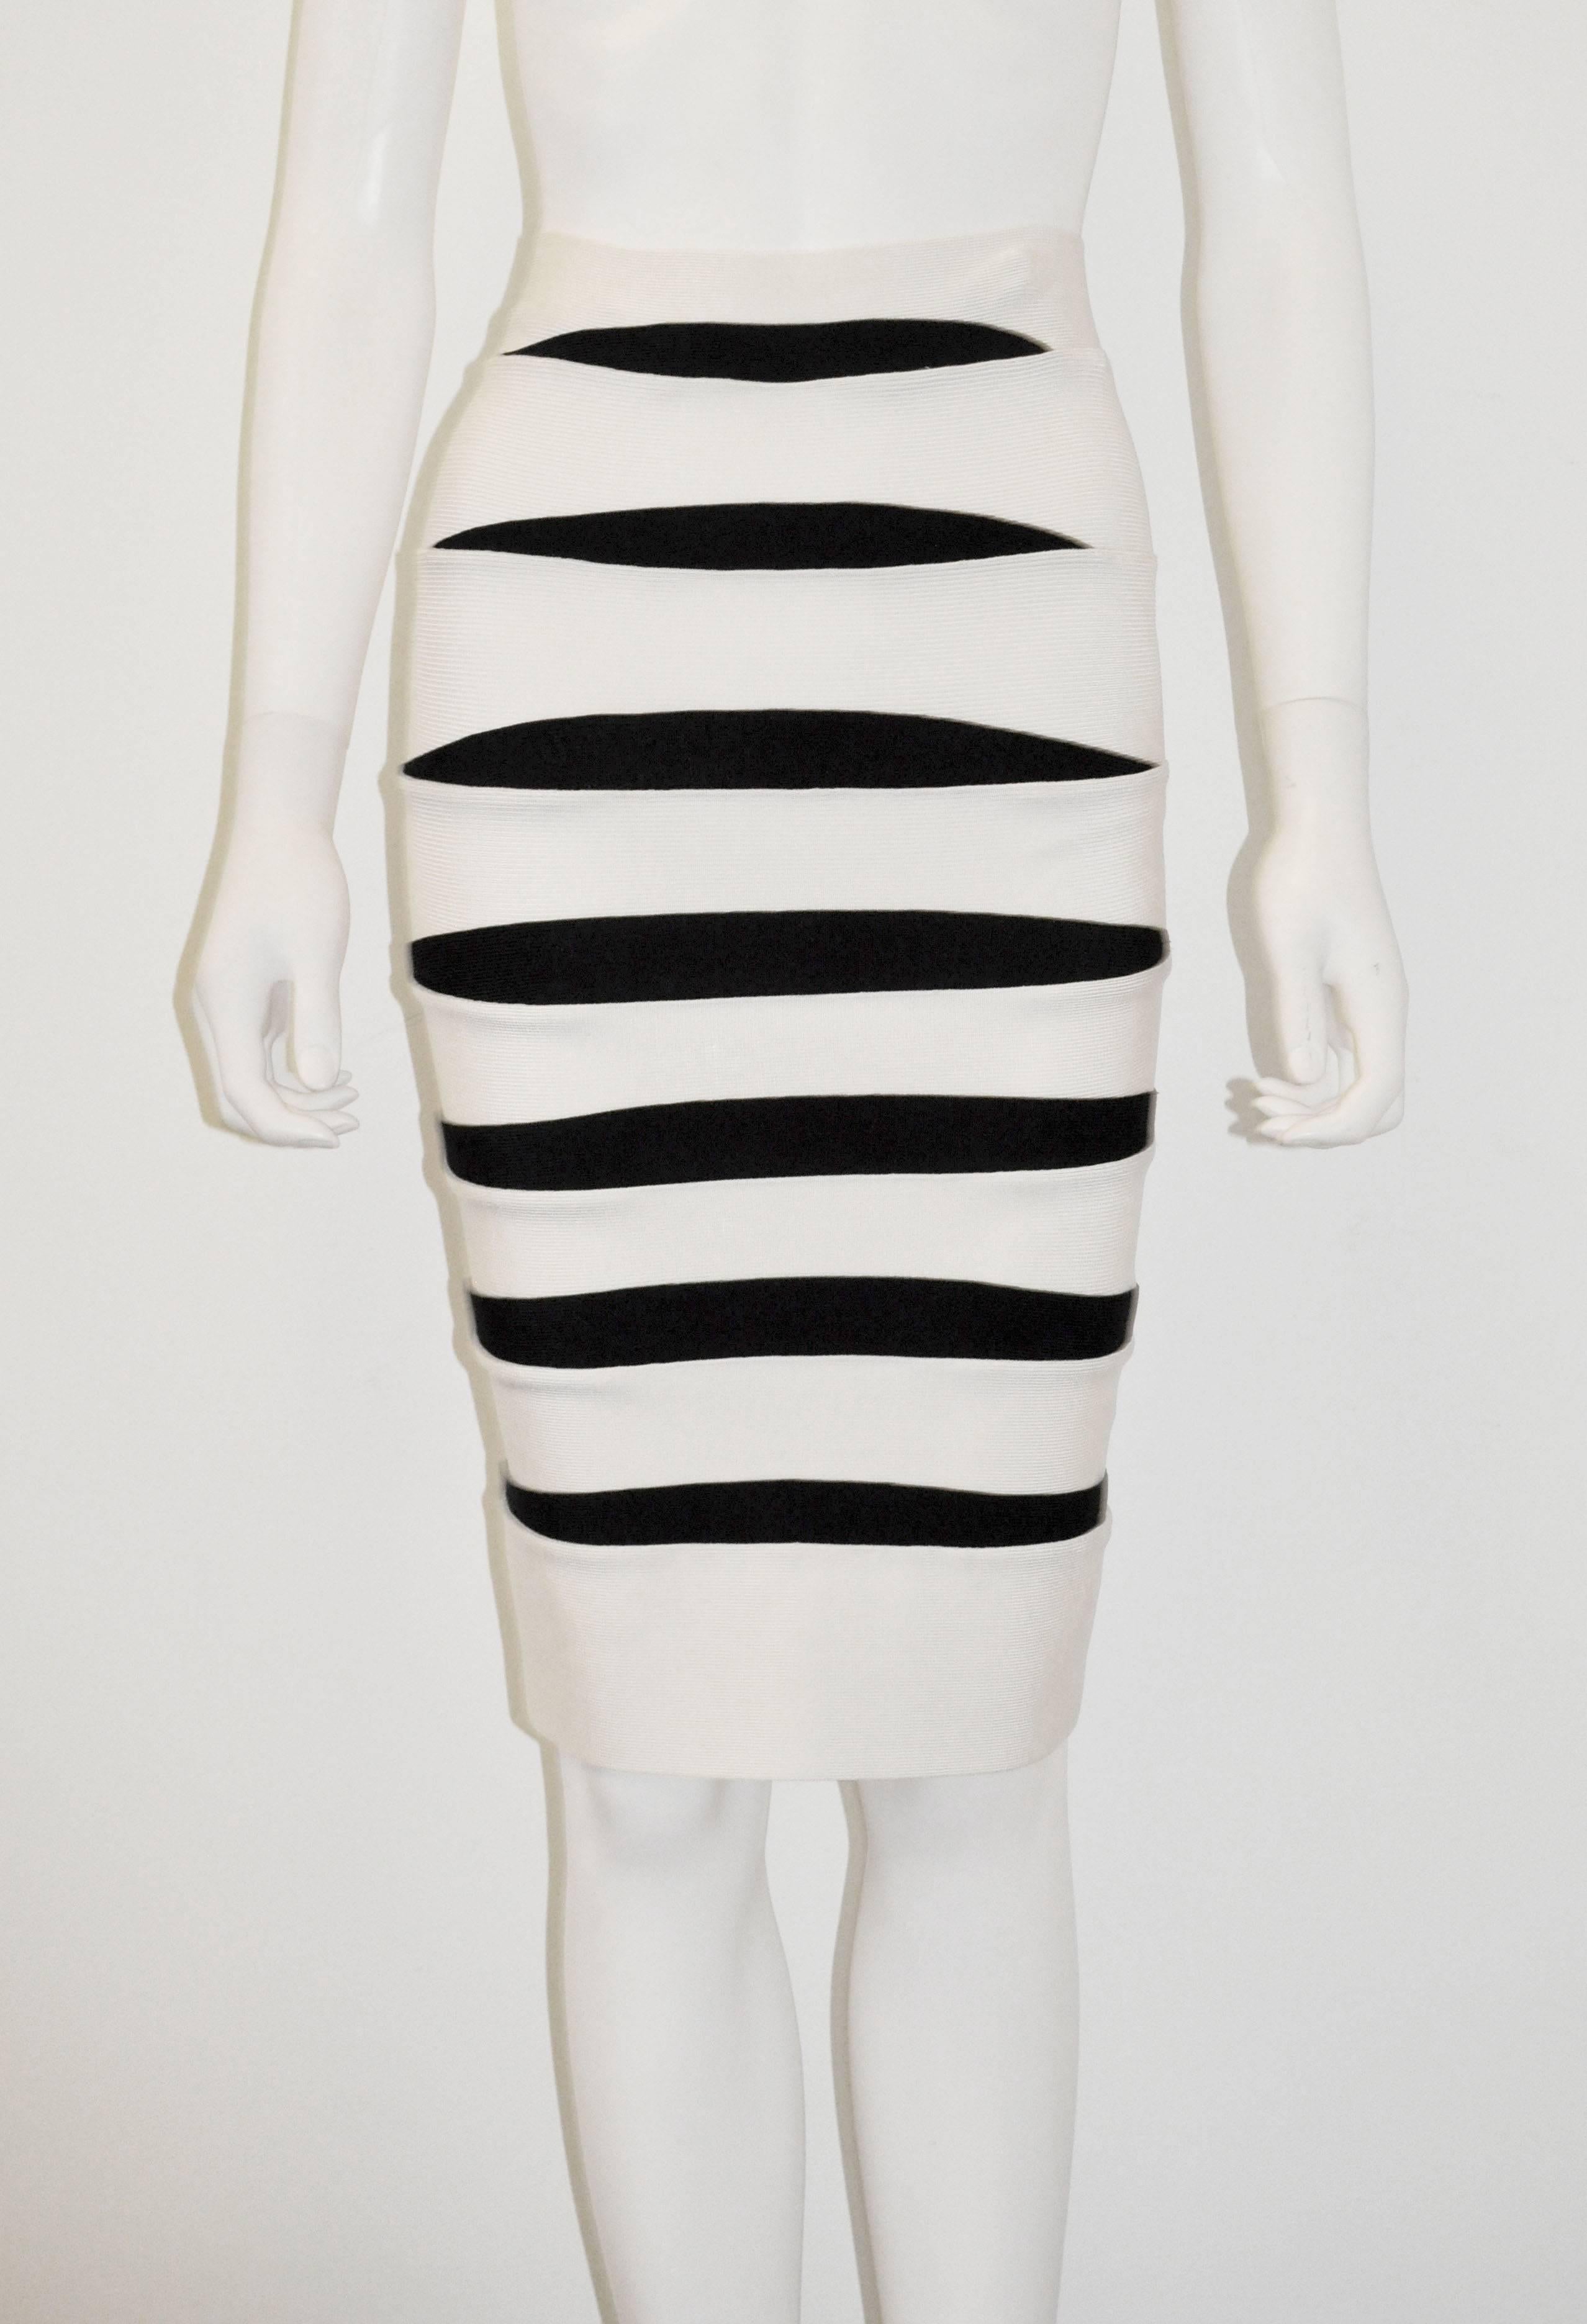 A stunning Herve Leger body con white bandage skirt with black horizontal contrast panels. The tight-fitting elasticated skirt is iconic to the Herve Leger brand. With a neutral colour palette of white and black, the skirt can be styled with almost